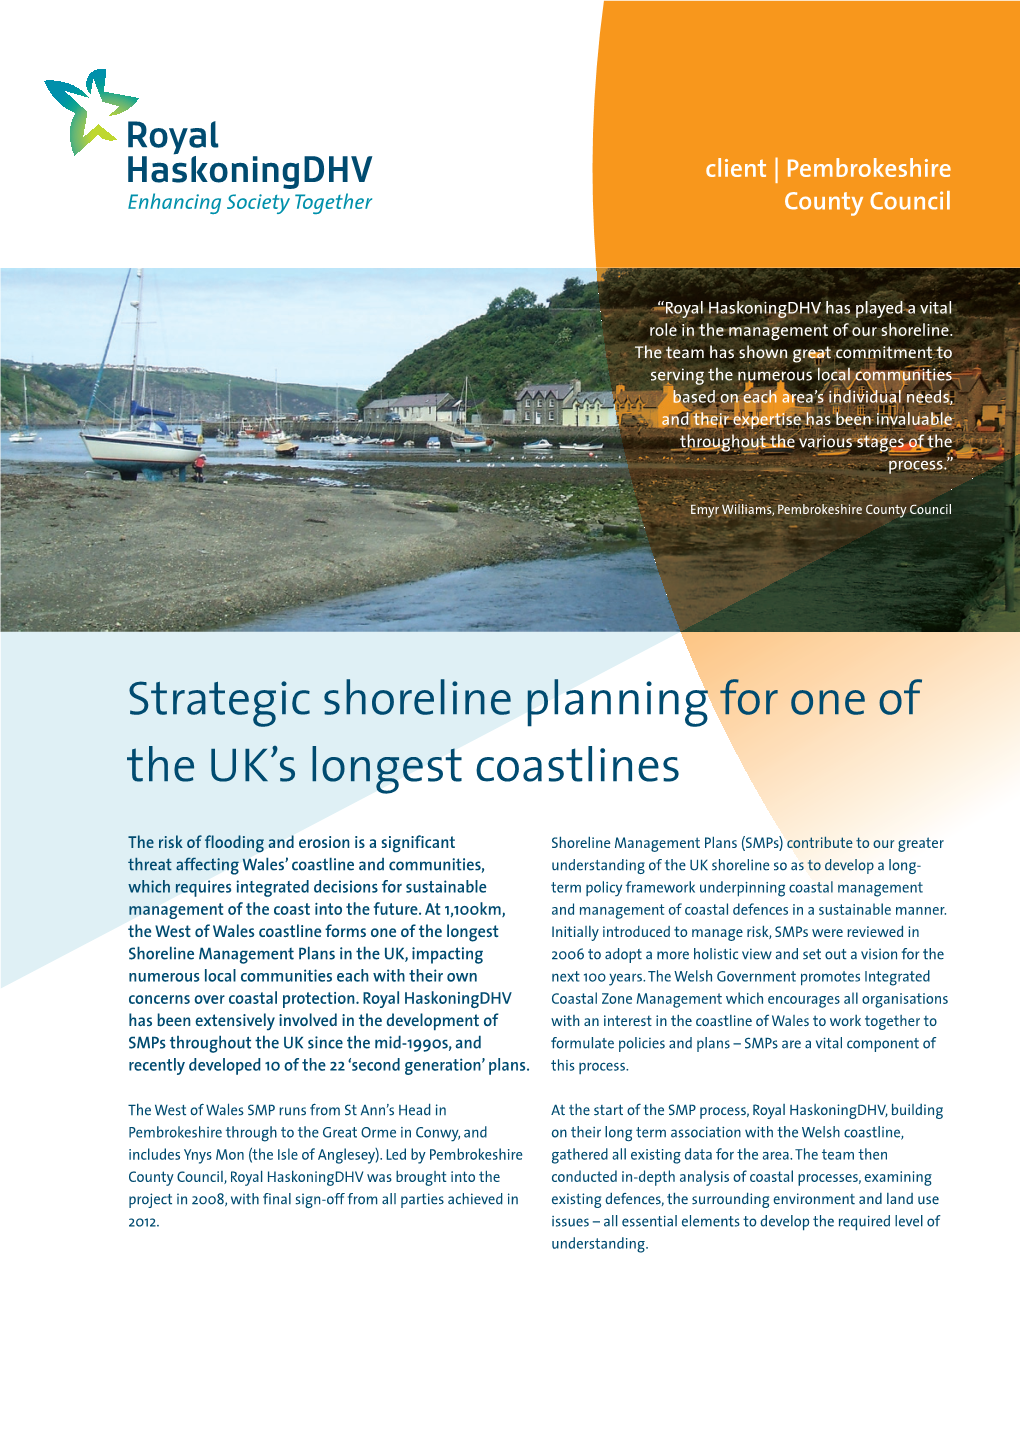 Download Our West of Wales SMP Case Study